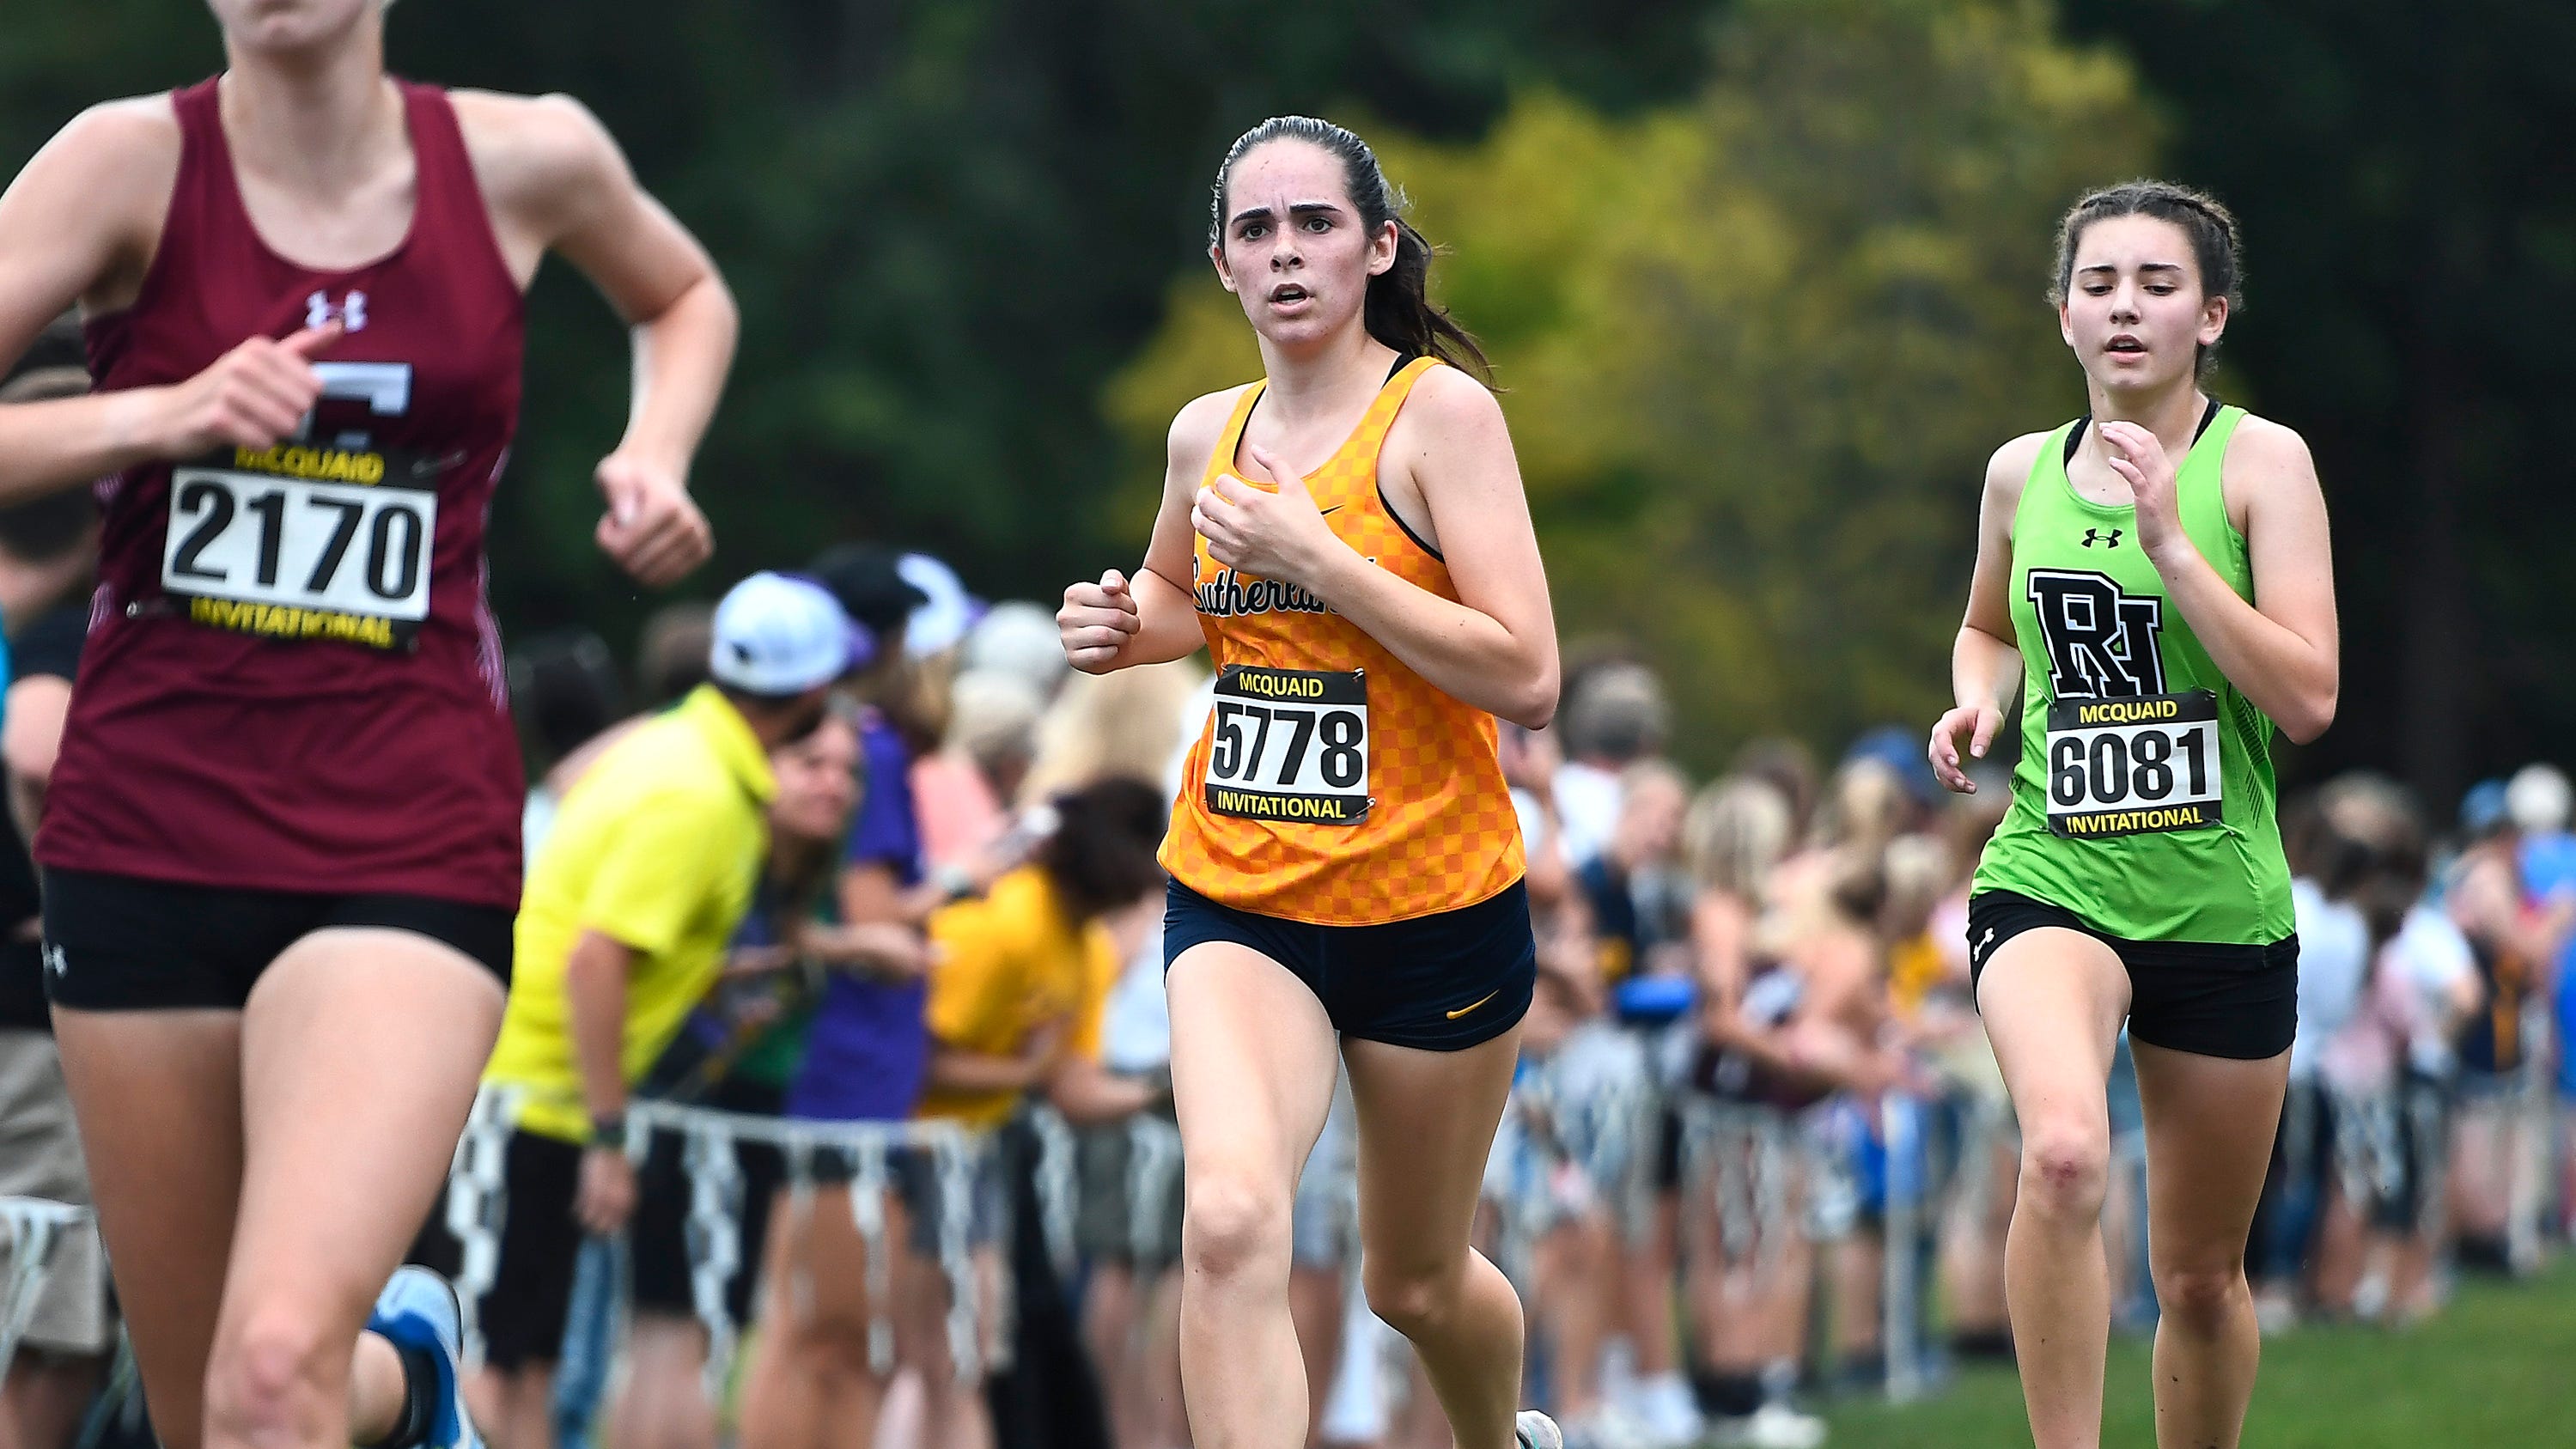 Cross country Sam Lawler, Pittsford Sutherland girls win Section V titles